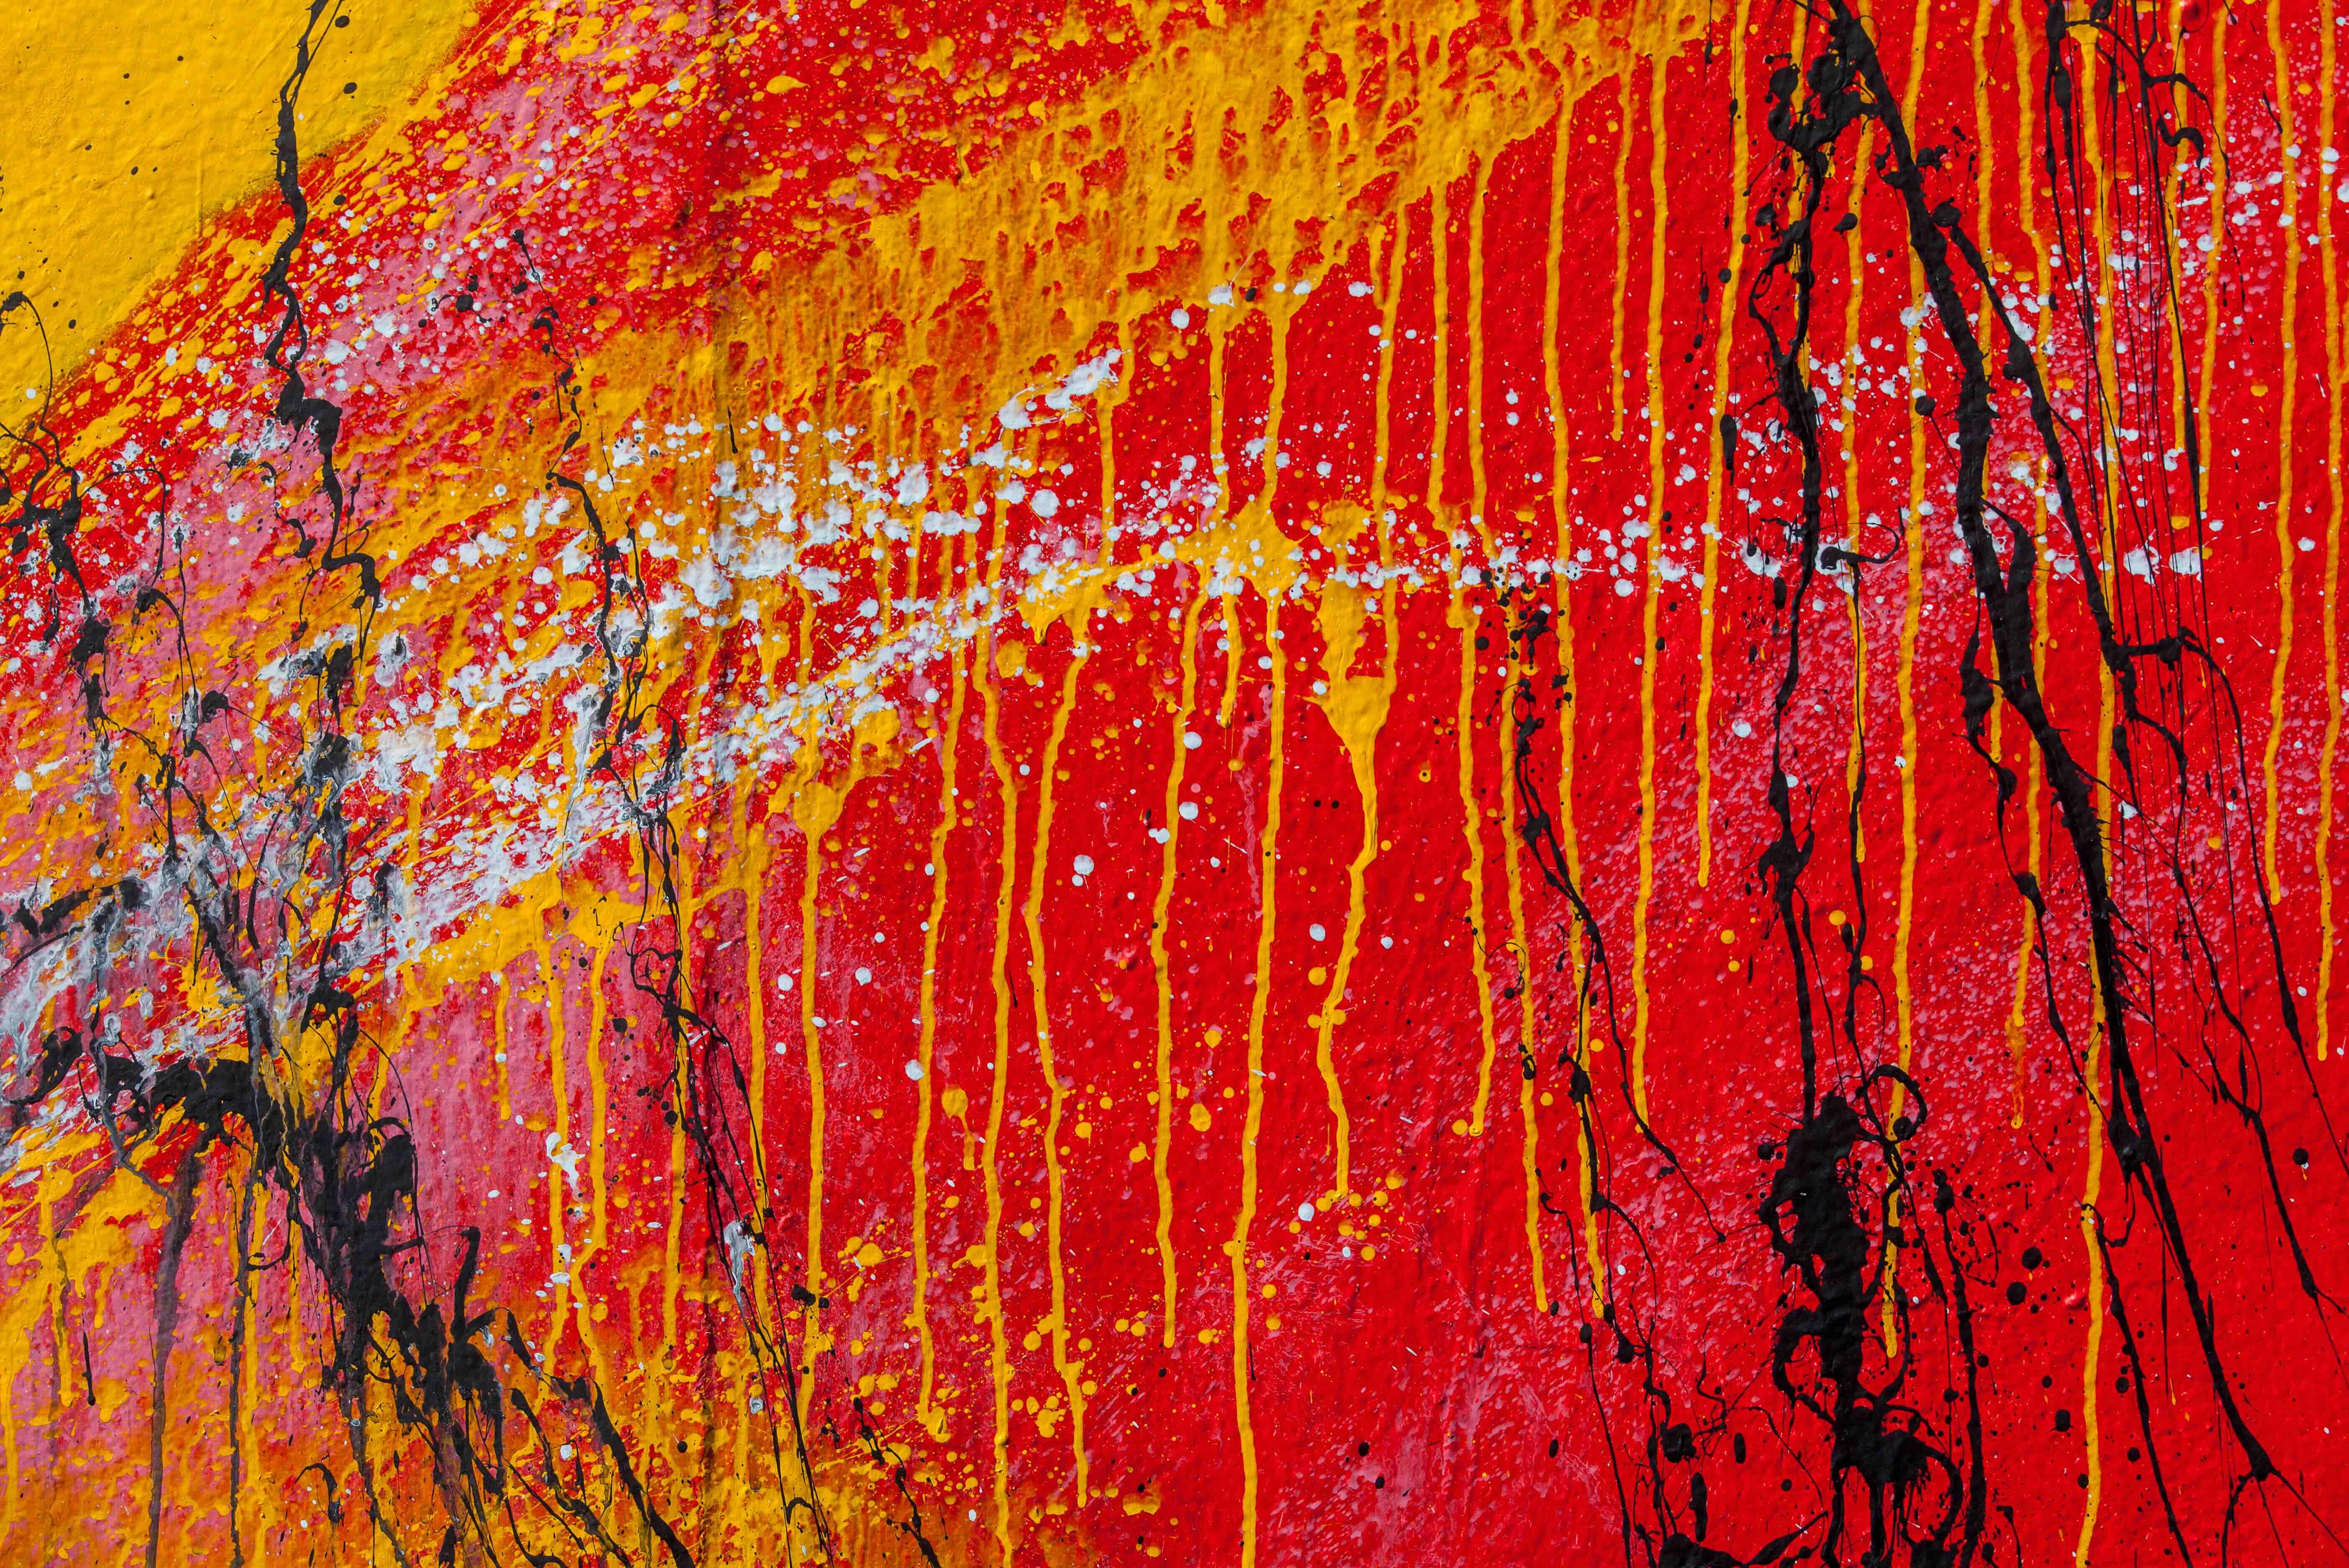 Red abstract painting with white, yellow, and black splatter and drip patterns